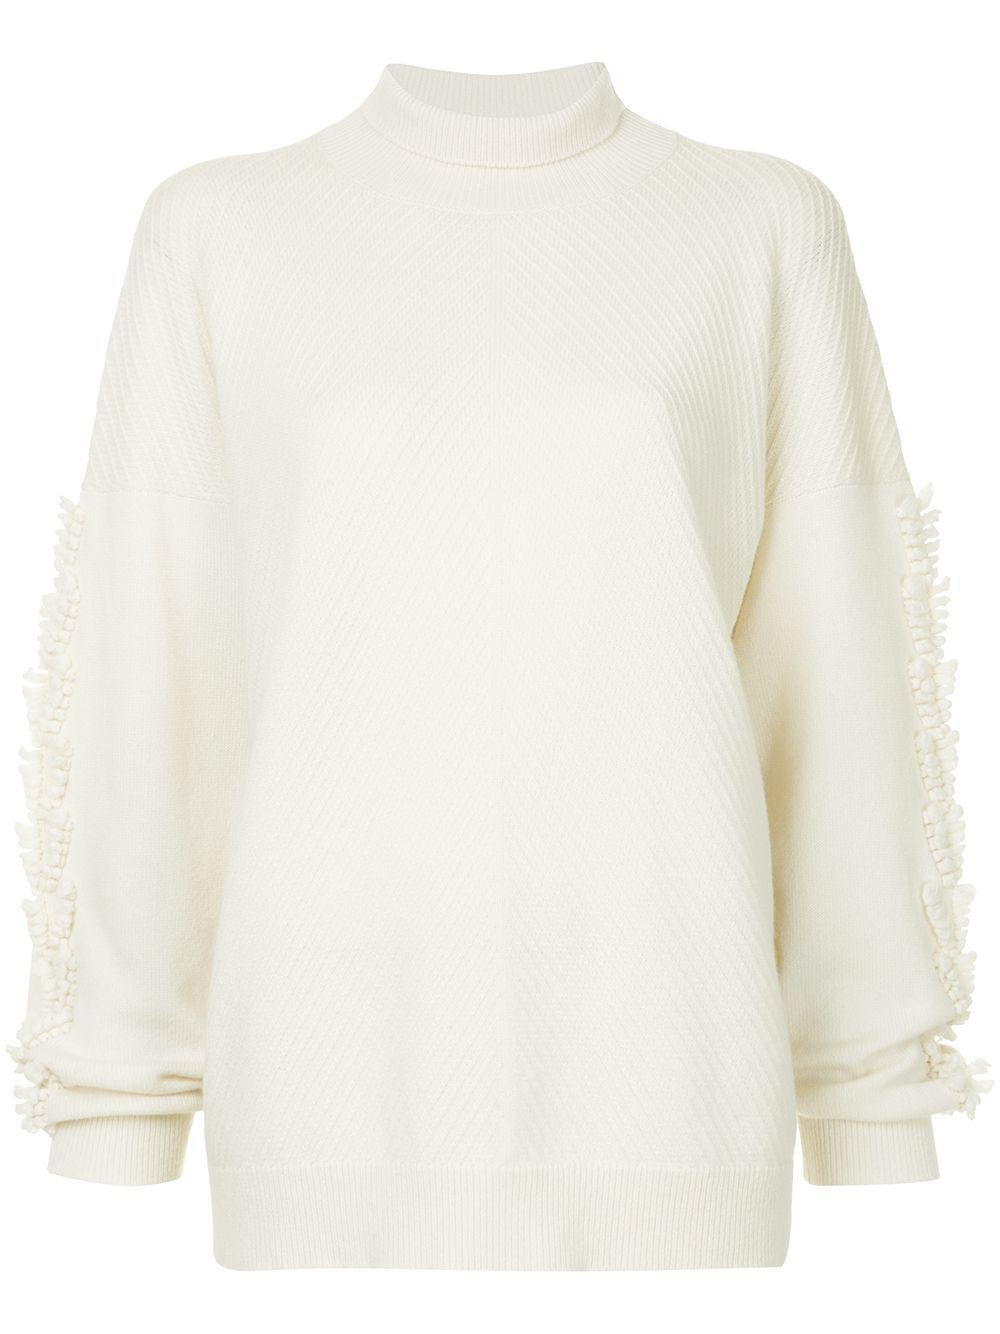 Troisieme Dimension cashmere turtleneck pullover by BARRIE